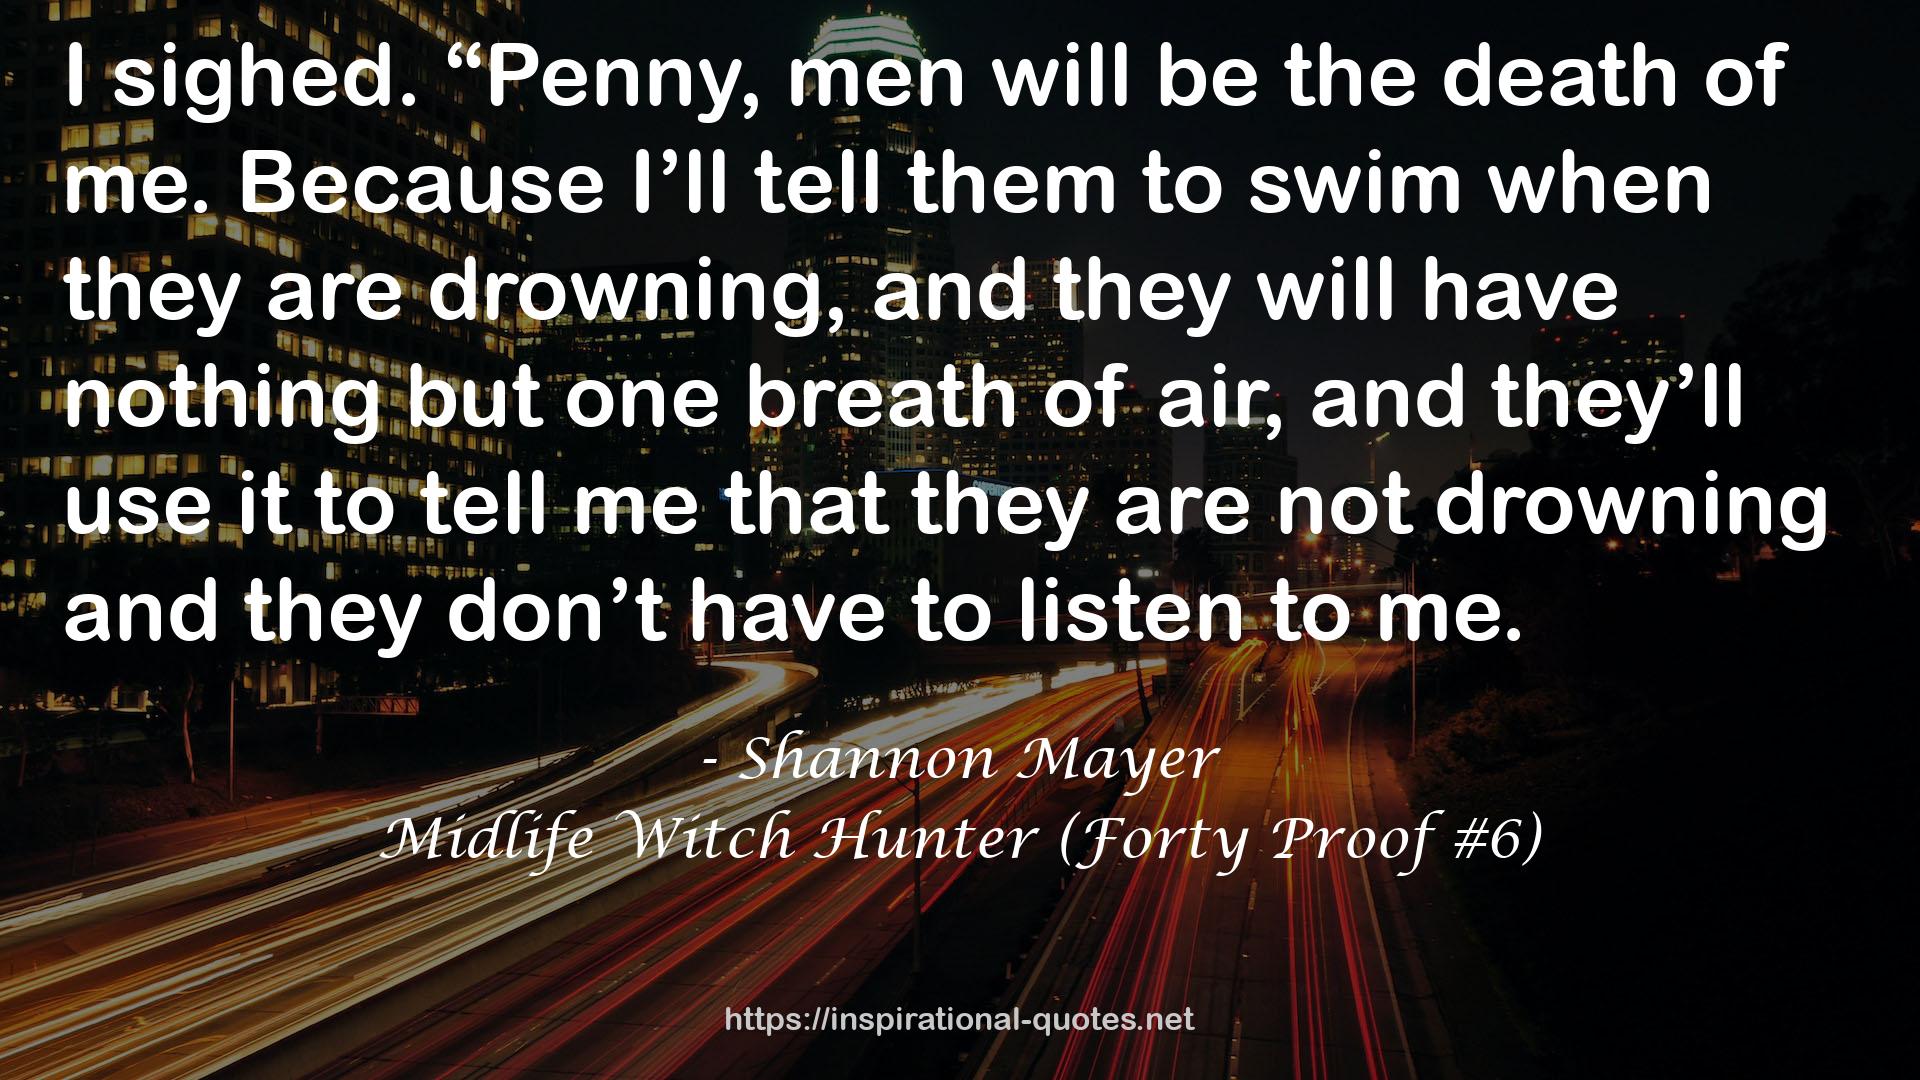 Midlife Witch Hunter (Forty Proof #6) QUOTES